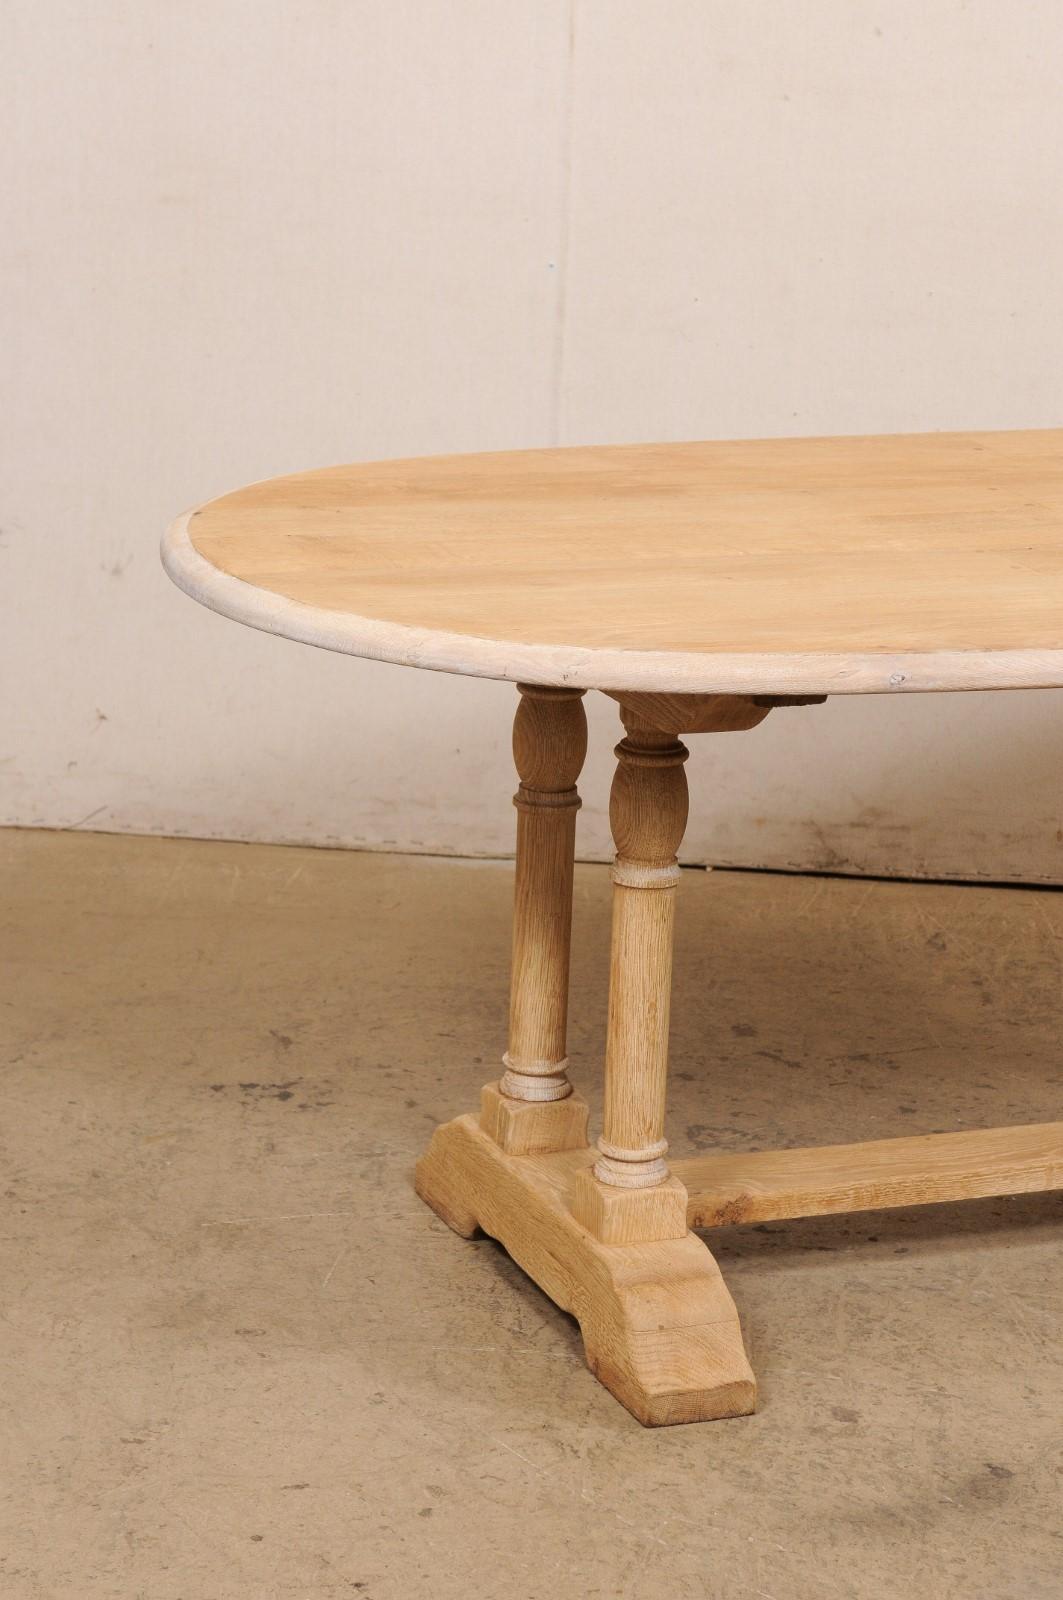 french oval dining table